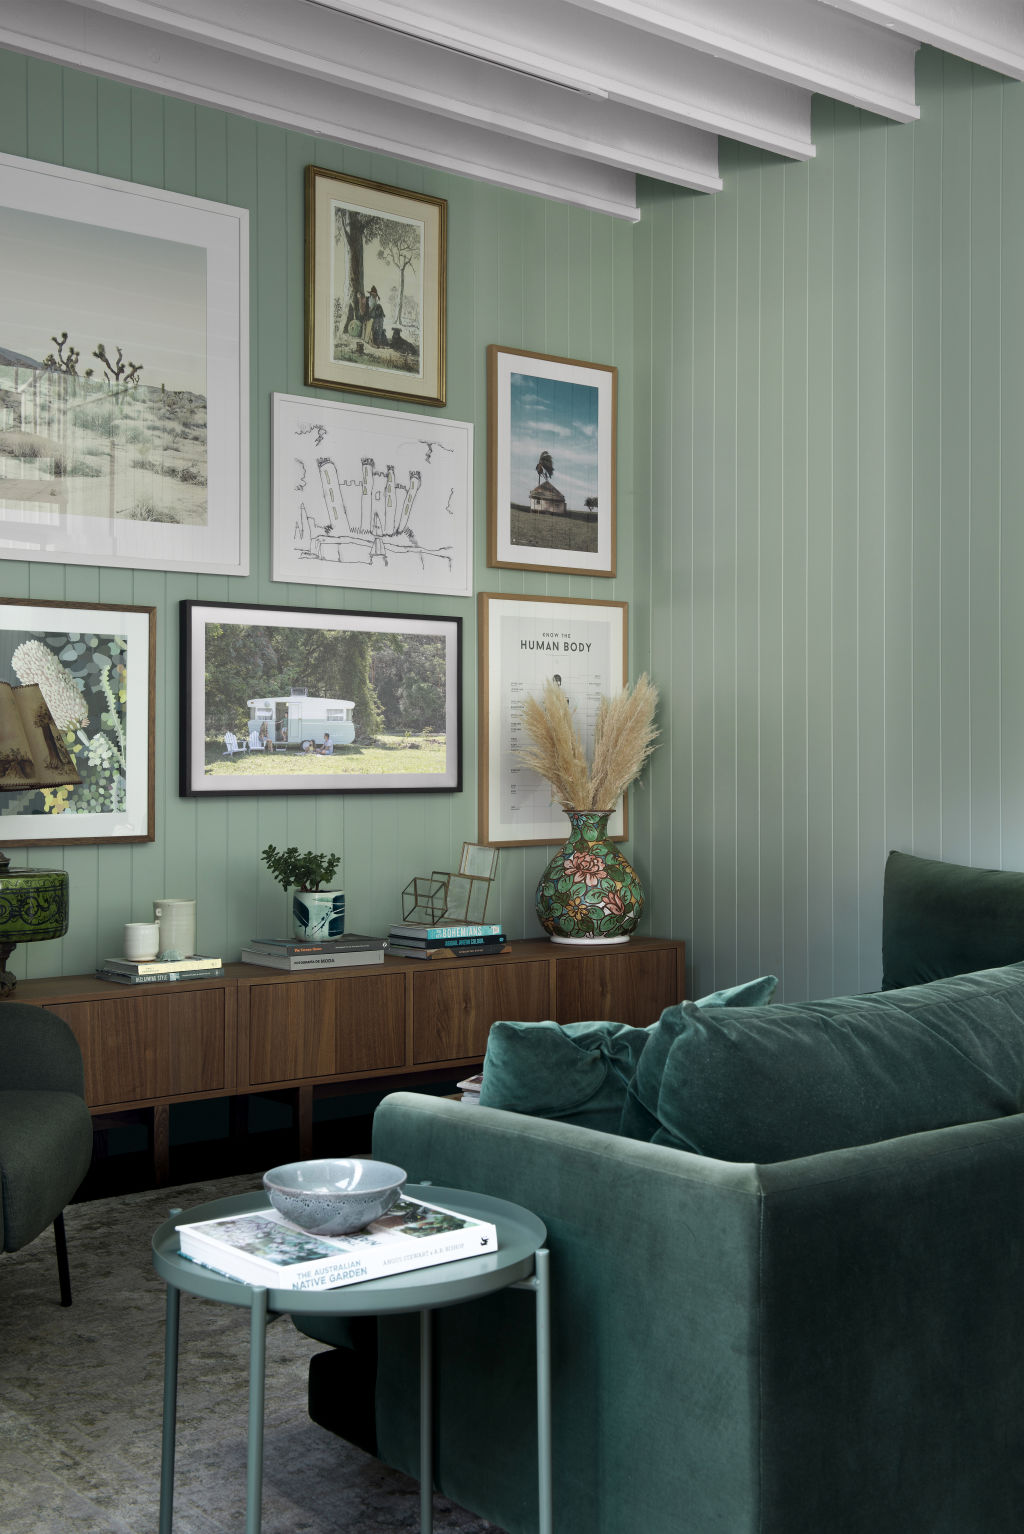 Carlene loves green, having decorated her own home in the calming hue. Photo: Mindi Cooke